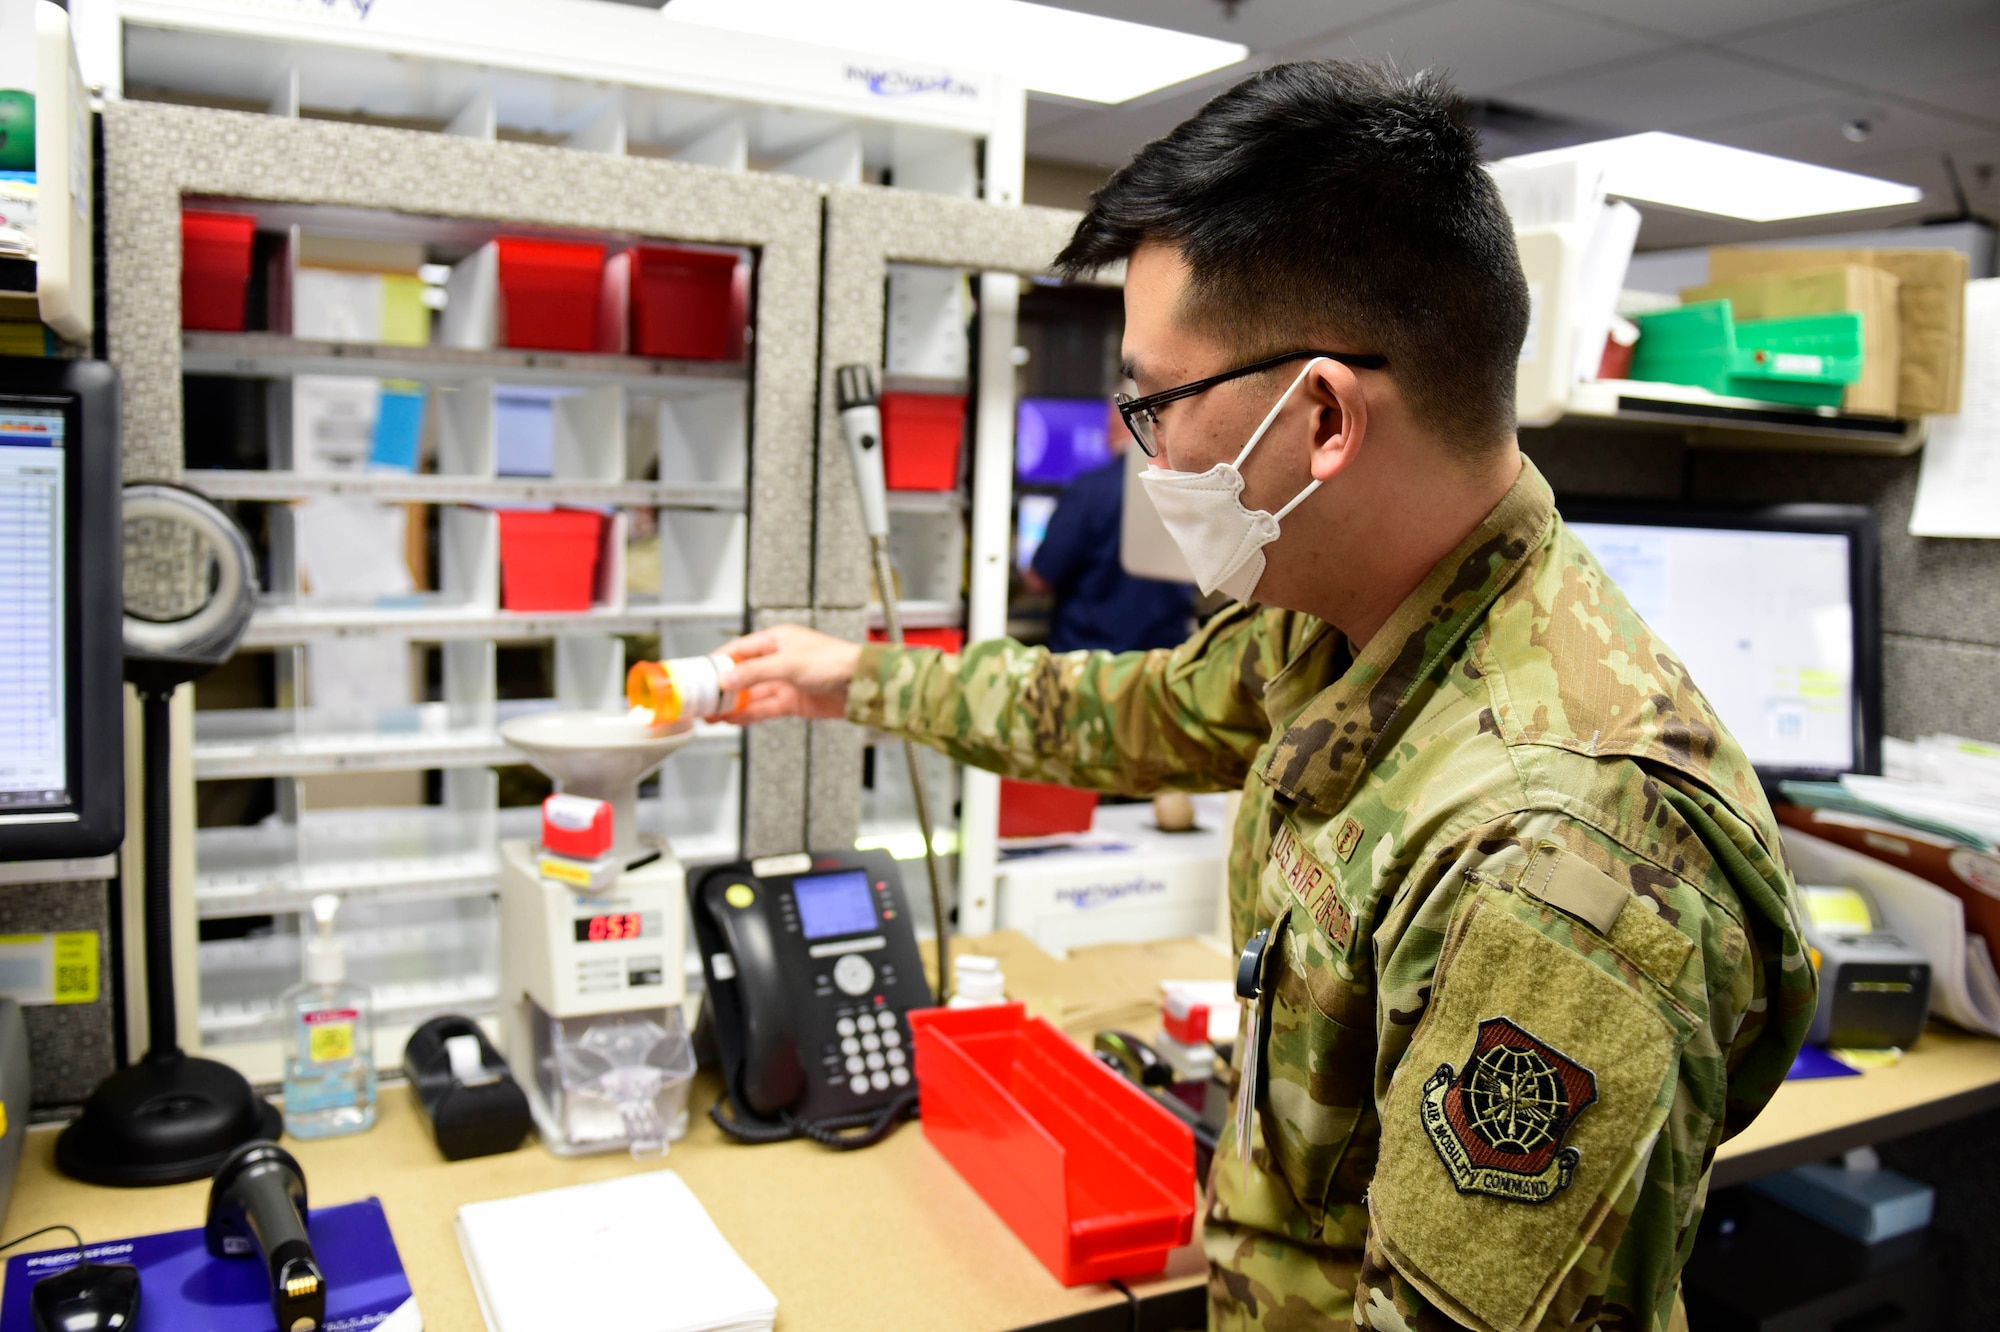 Capt. David Kim, 92nd Medical Support Squadron chief of pharmacy operations, pours medication into a medication counting machine, May 29, 2020, at Fairchild Air Force Base, Wash. Even after initial dispensing of medications, a new medication count is conducted to ensure accuracy across all stages of the pharmacy processes before giving patients their prescriptions. (U.S. Air Force photo by Staff Sgt. Nick J. Daniello)